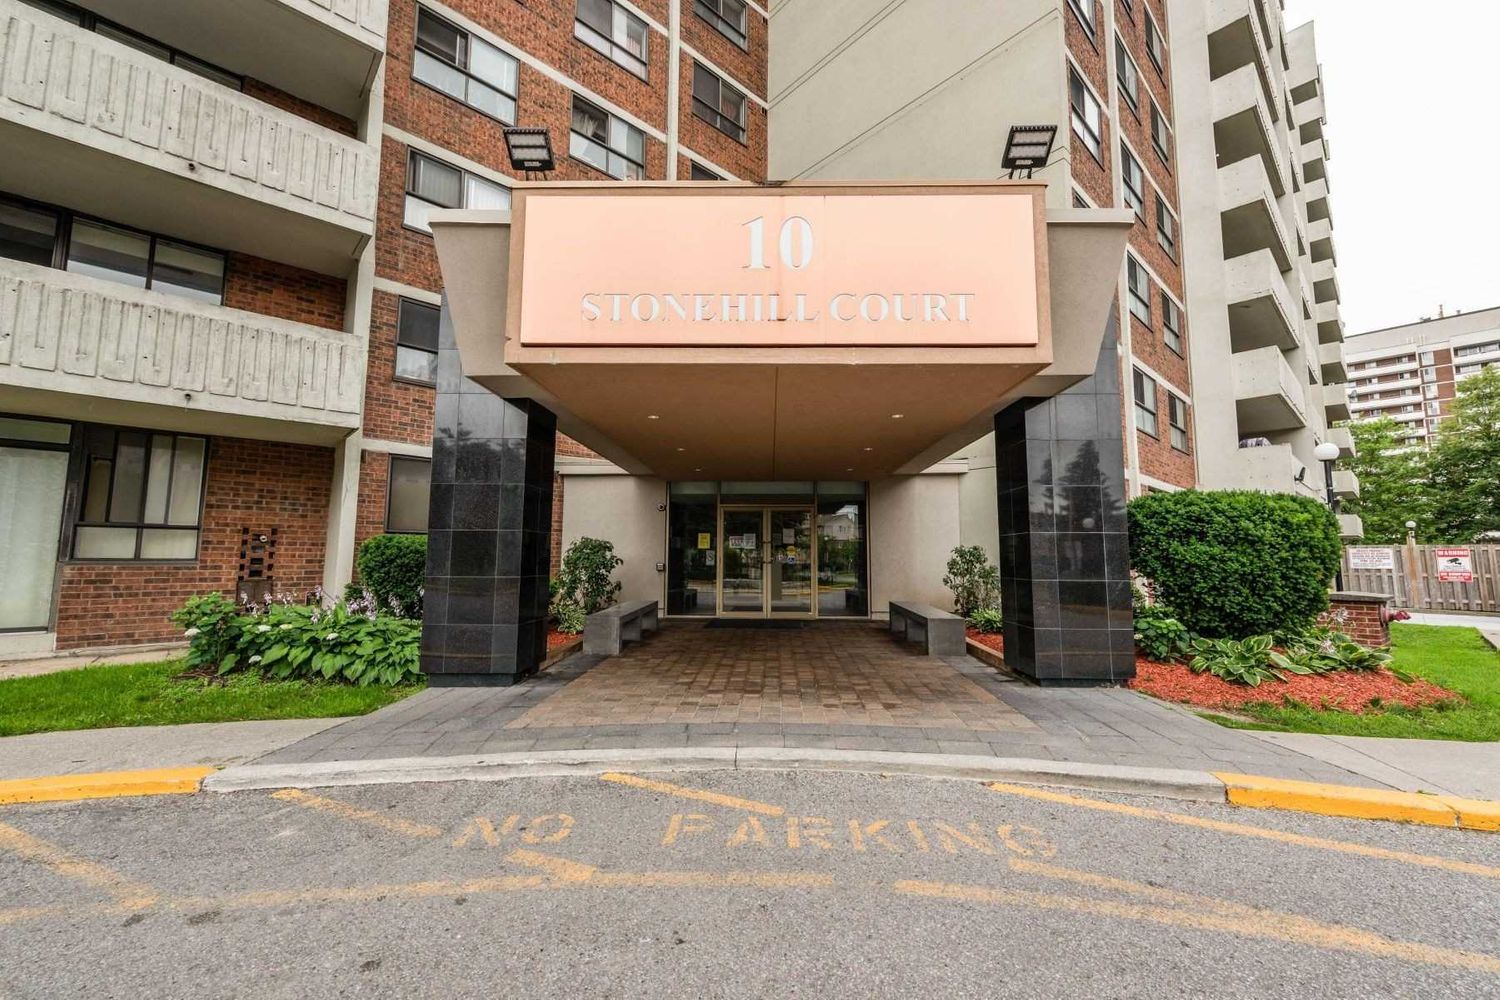 10 Stonehill Court. 10 Stonehill Court Condos is located in  Scarborough, Toronto - image #2 of 3